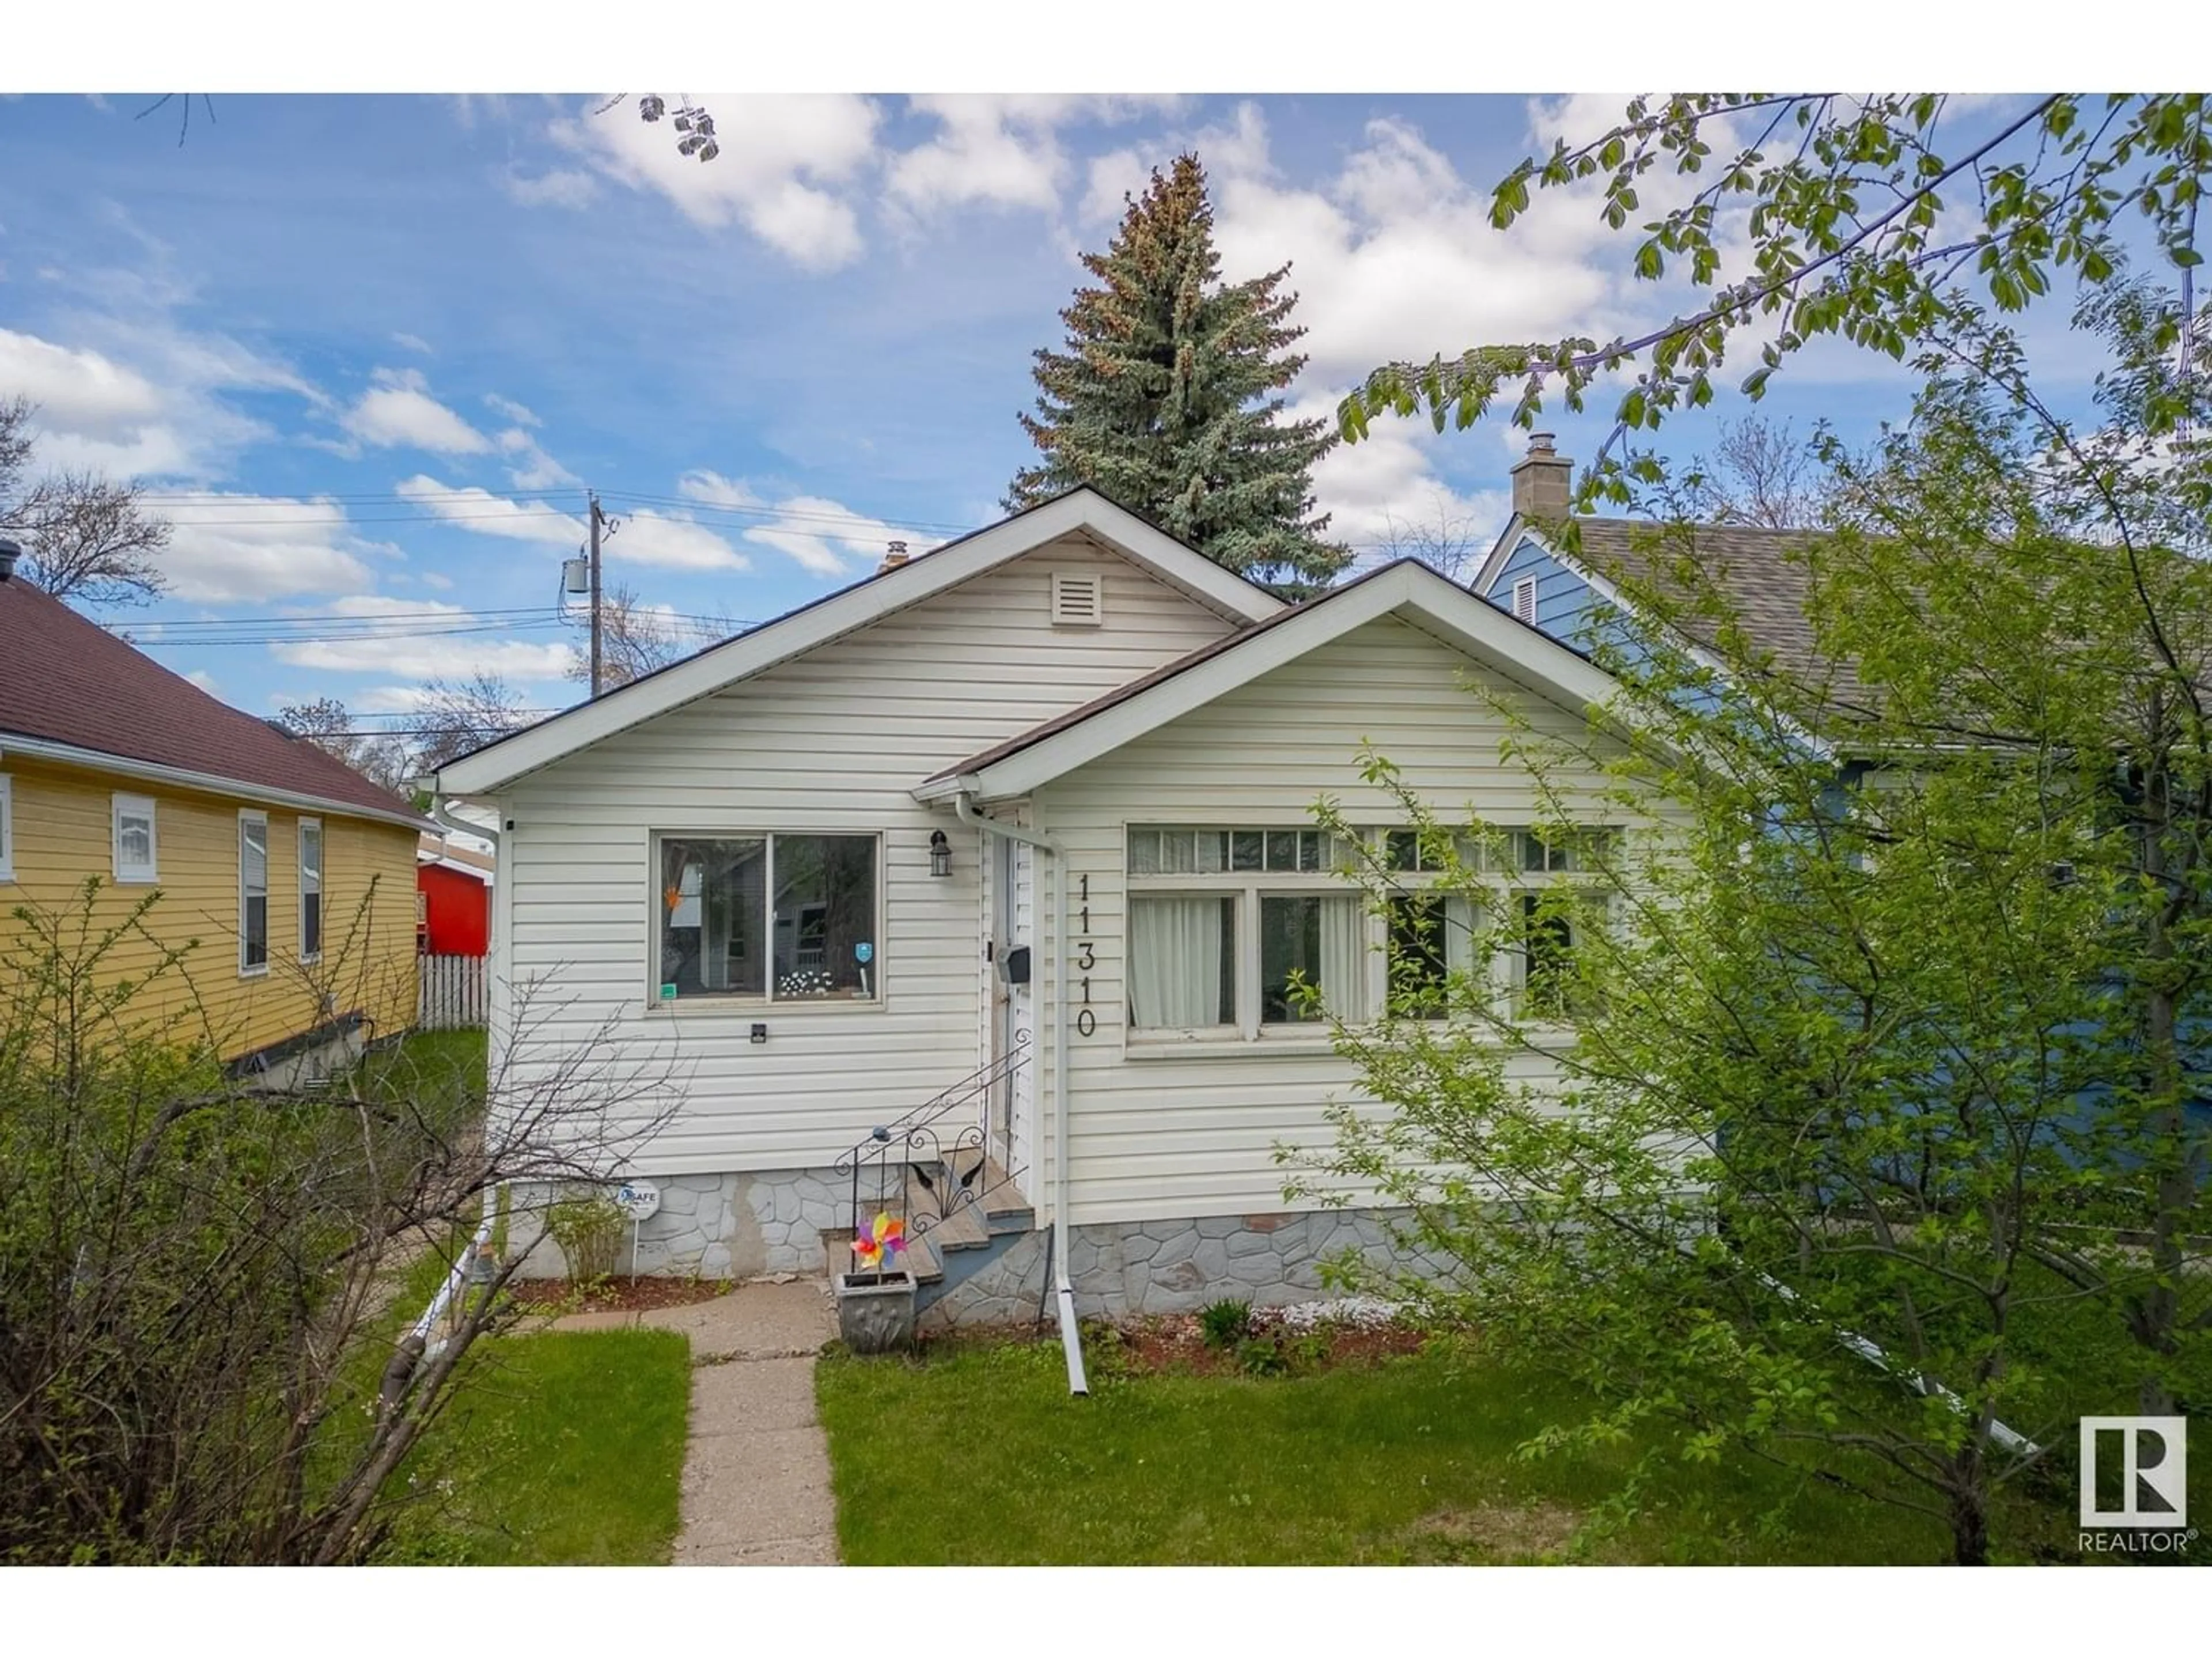 Frontside or backside of a home for 11310 96 ST NW, Edmonton Alberta T5G1T3